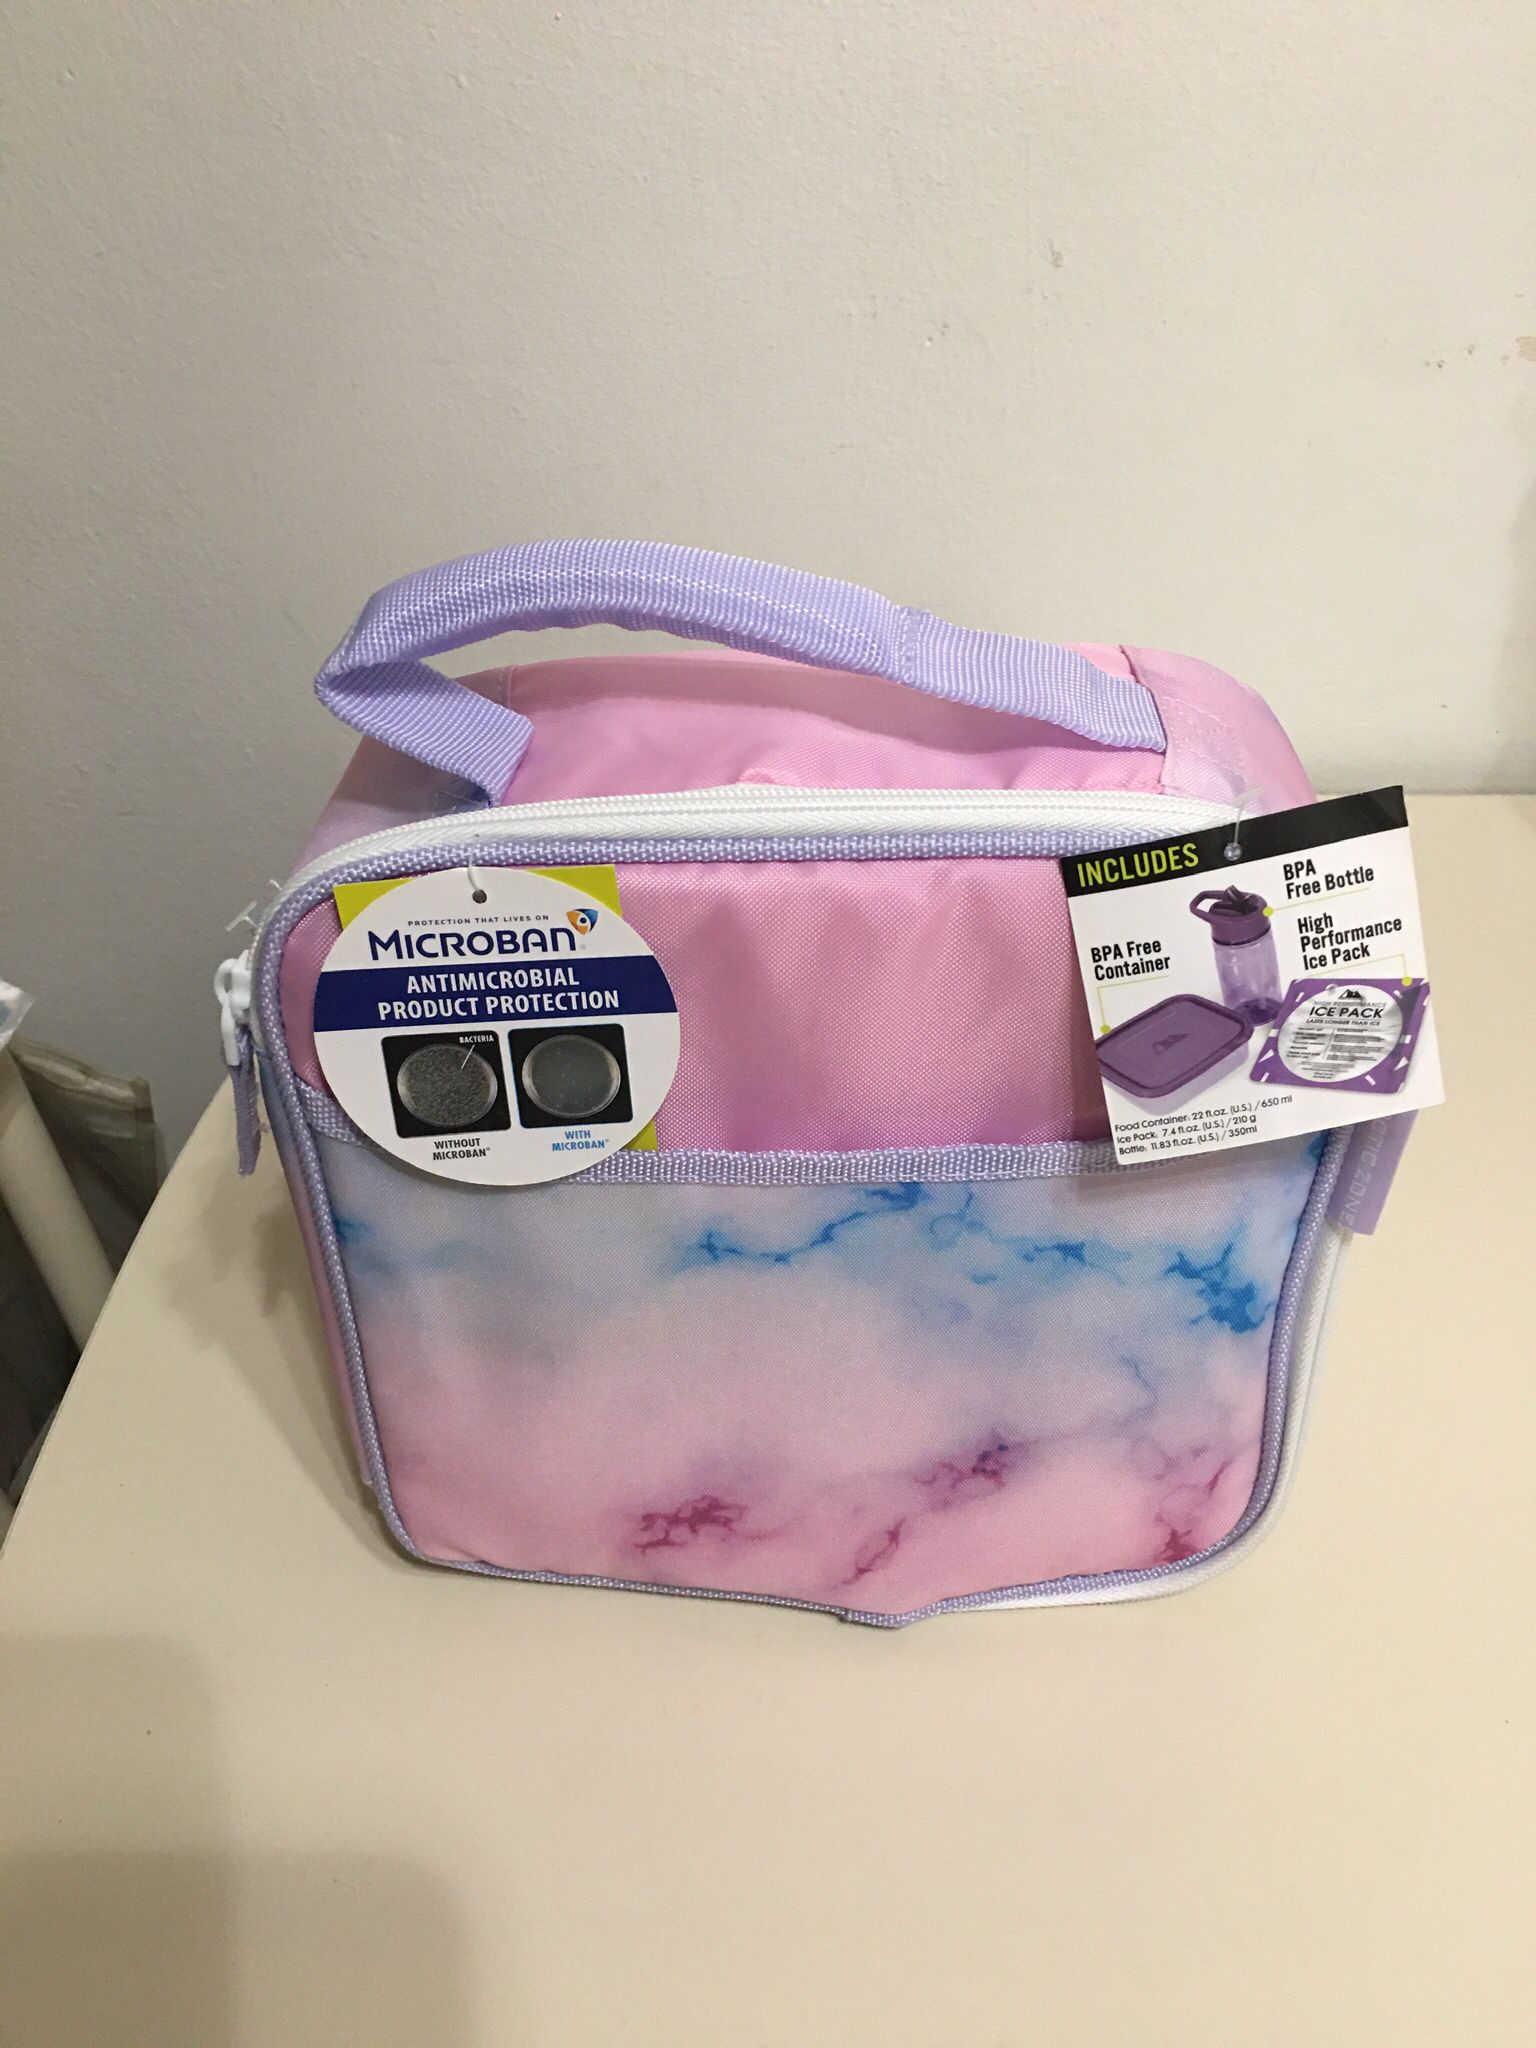 Artic Insulated Kids Lunch Box with Ice pack, Sandwich Container, Water Bottle